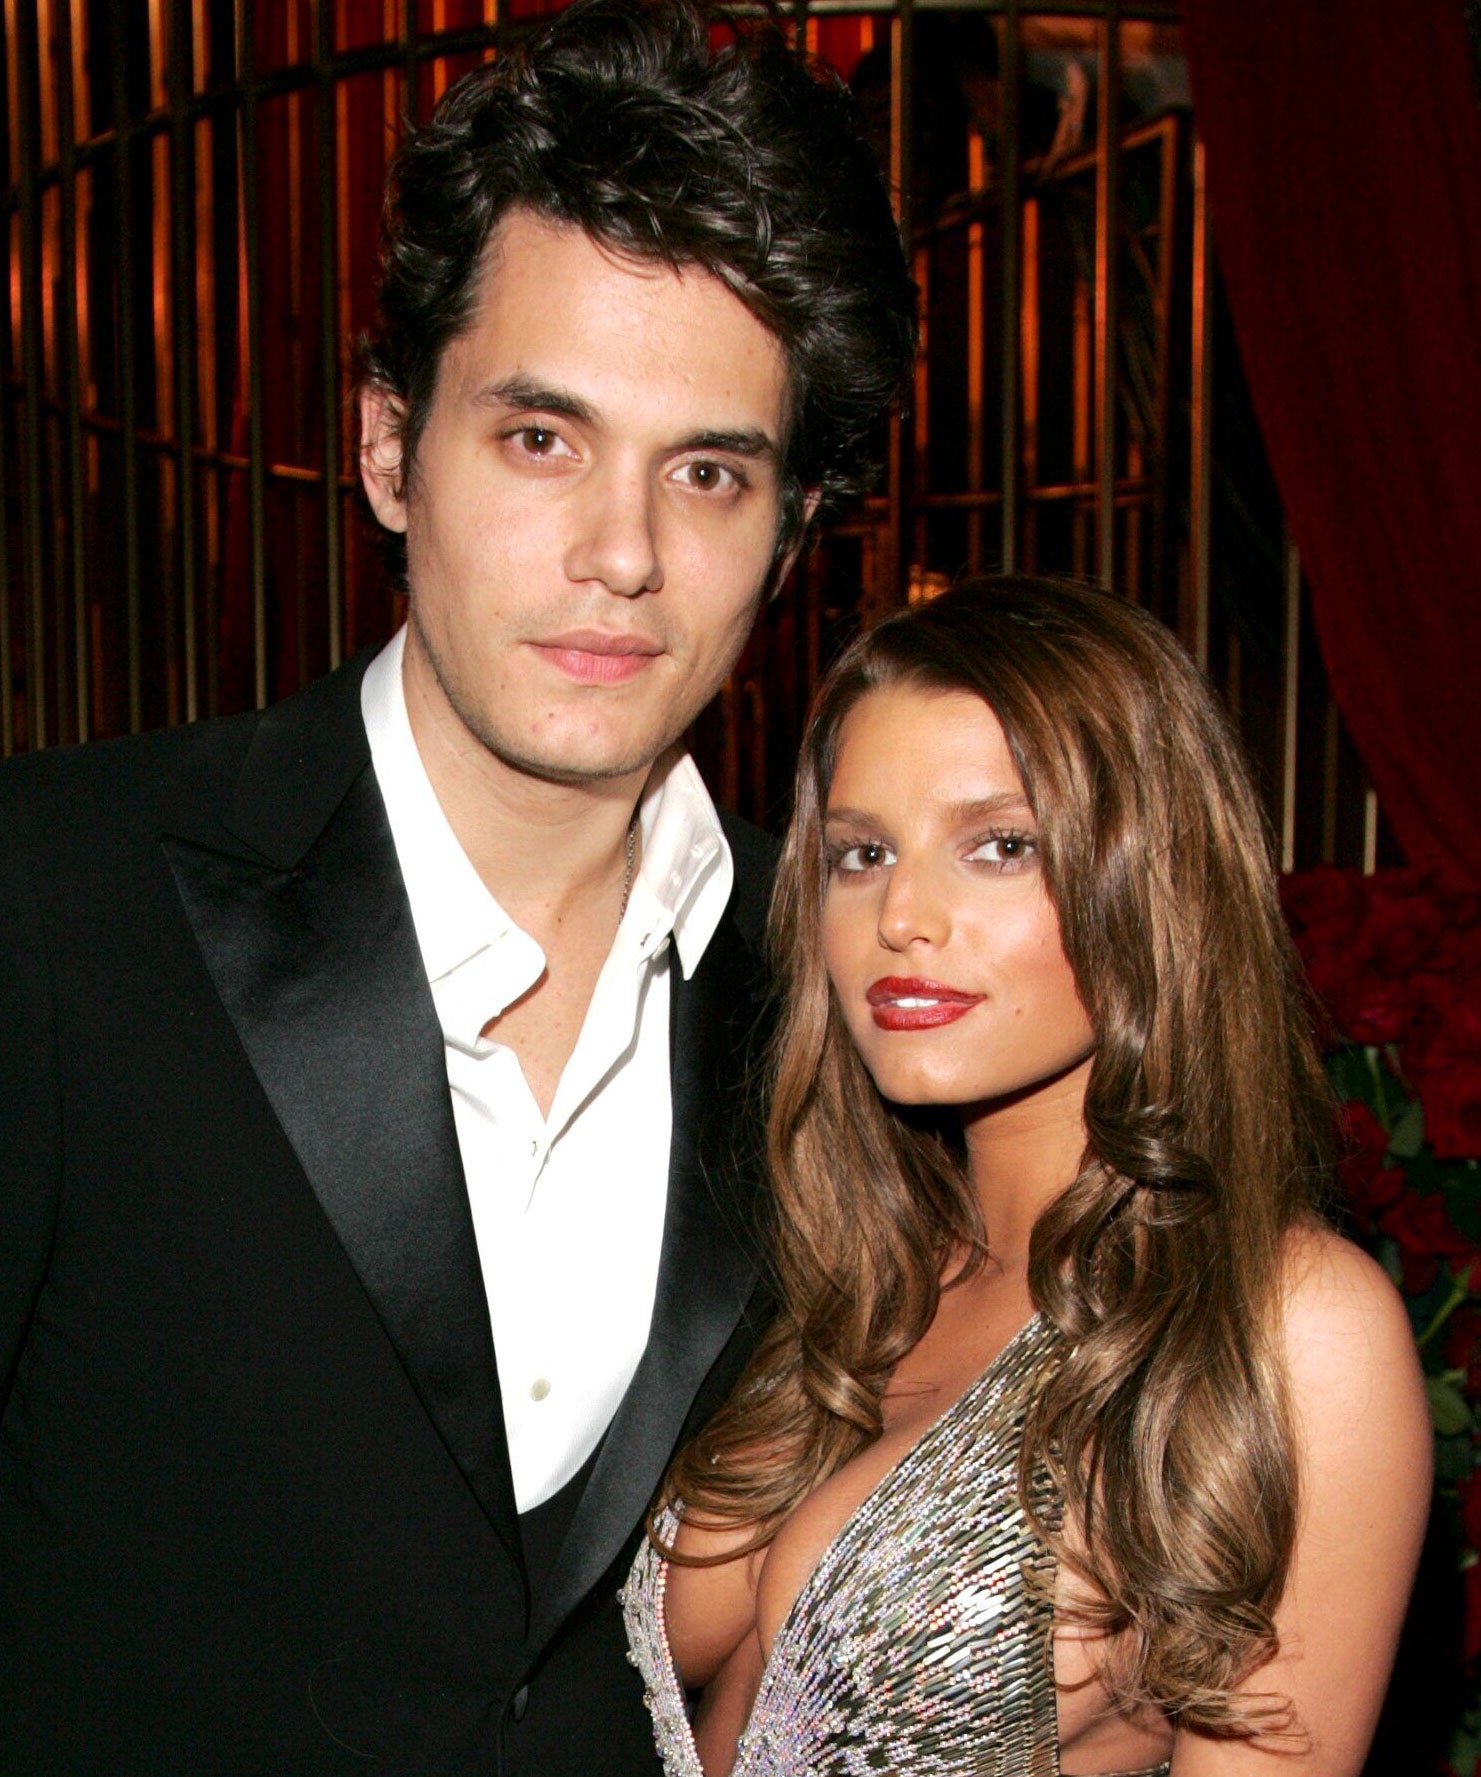 Dating john mayer Who Is